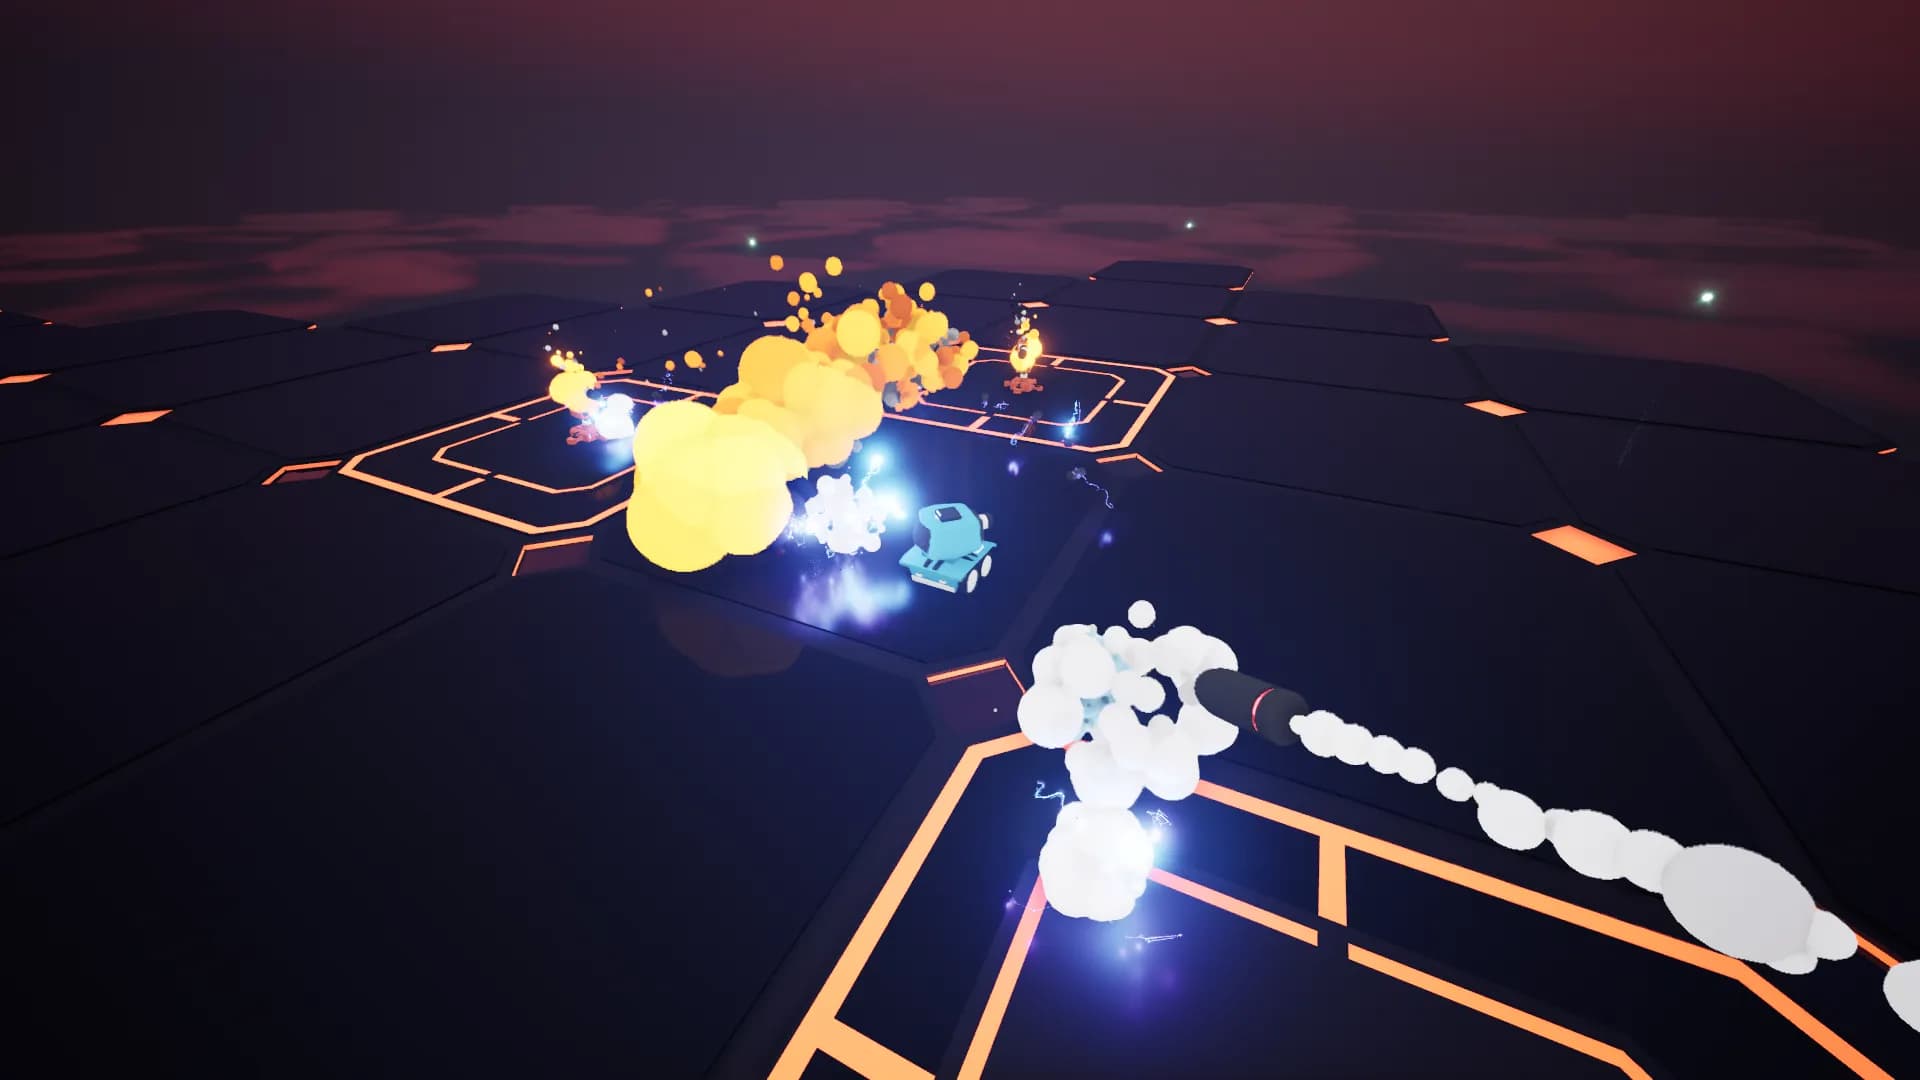 Screenshot 4: Tank in intense combat with various kinds of towers